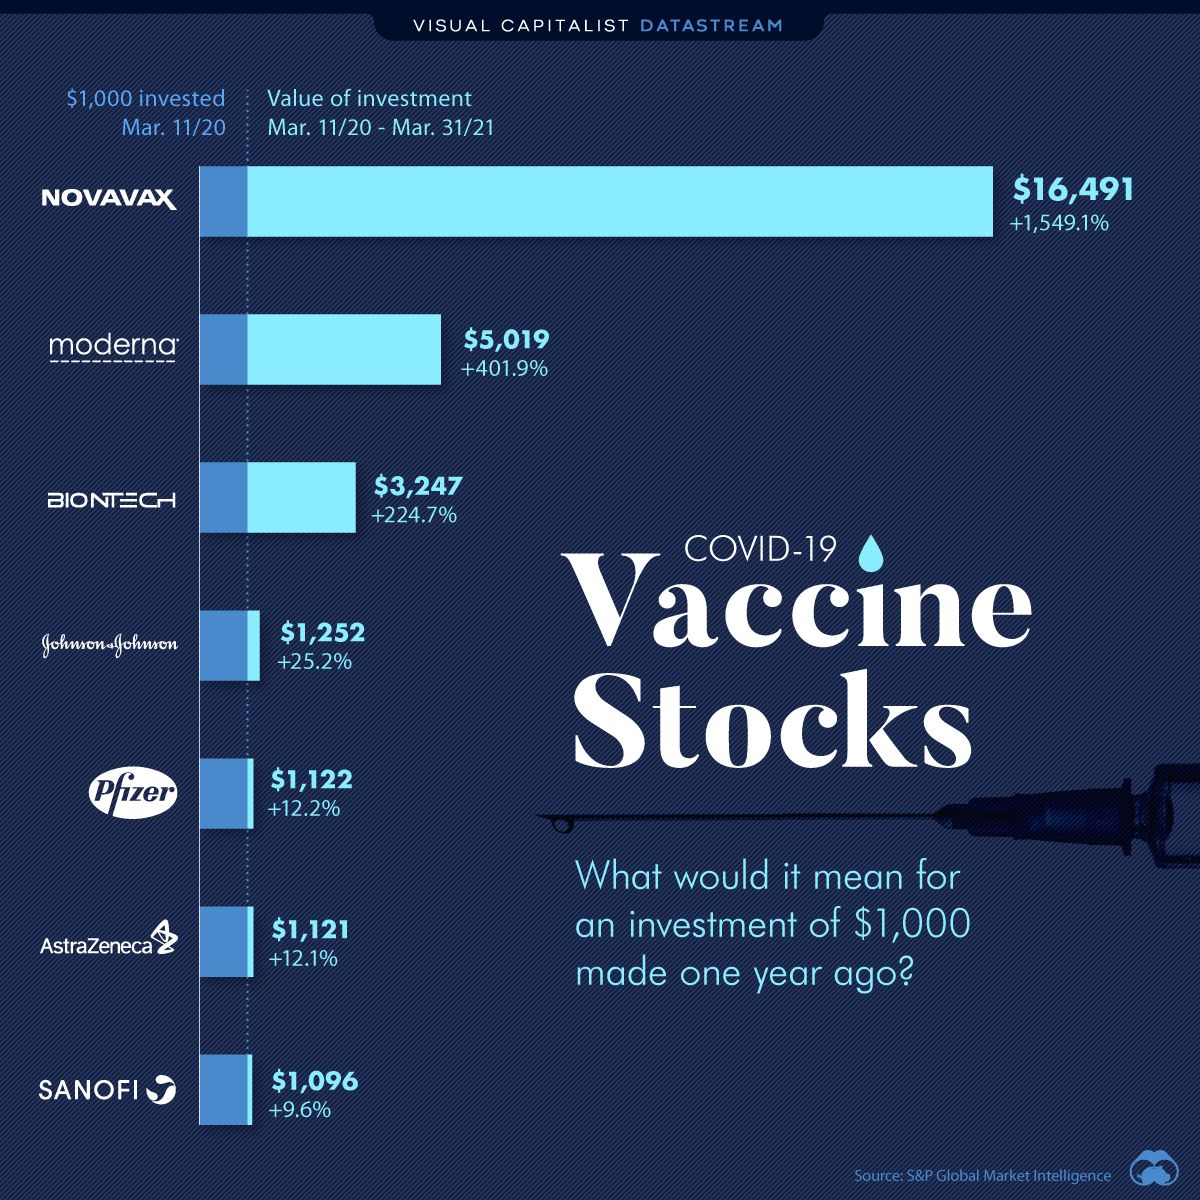 Vaccine stocks performance during the pandemic